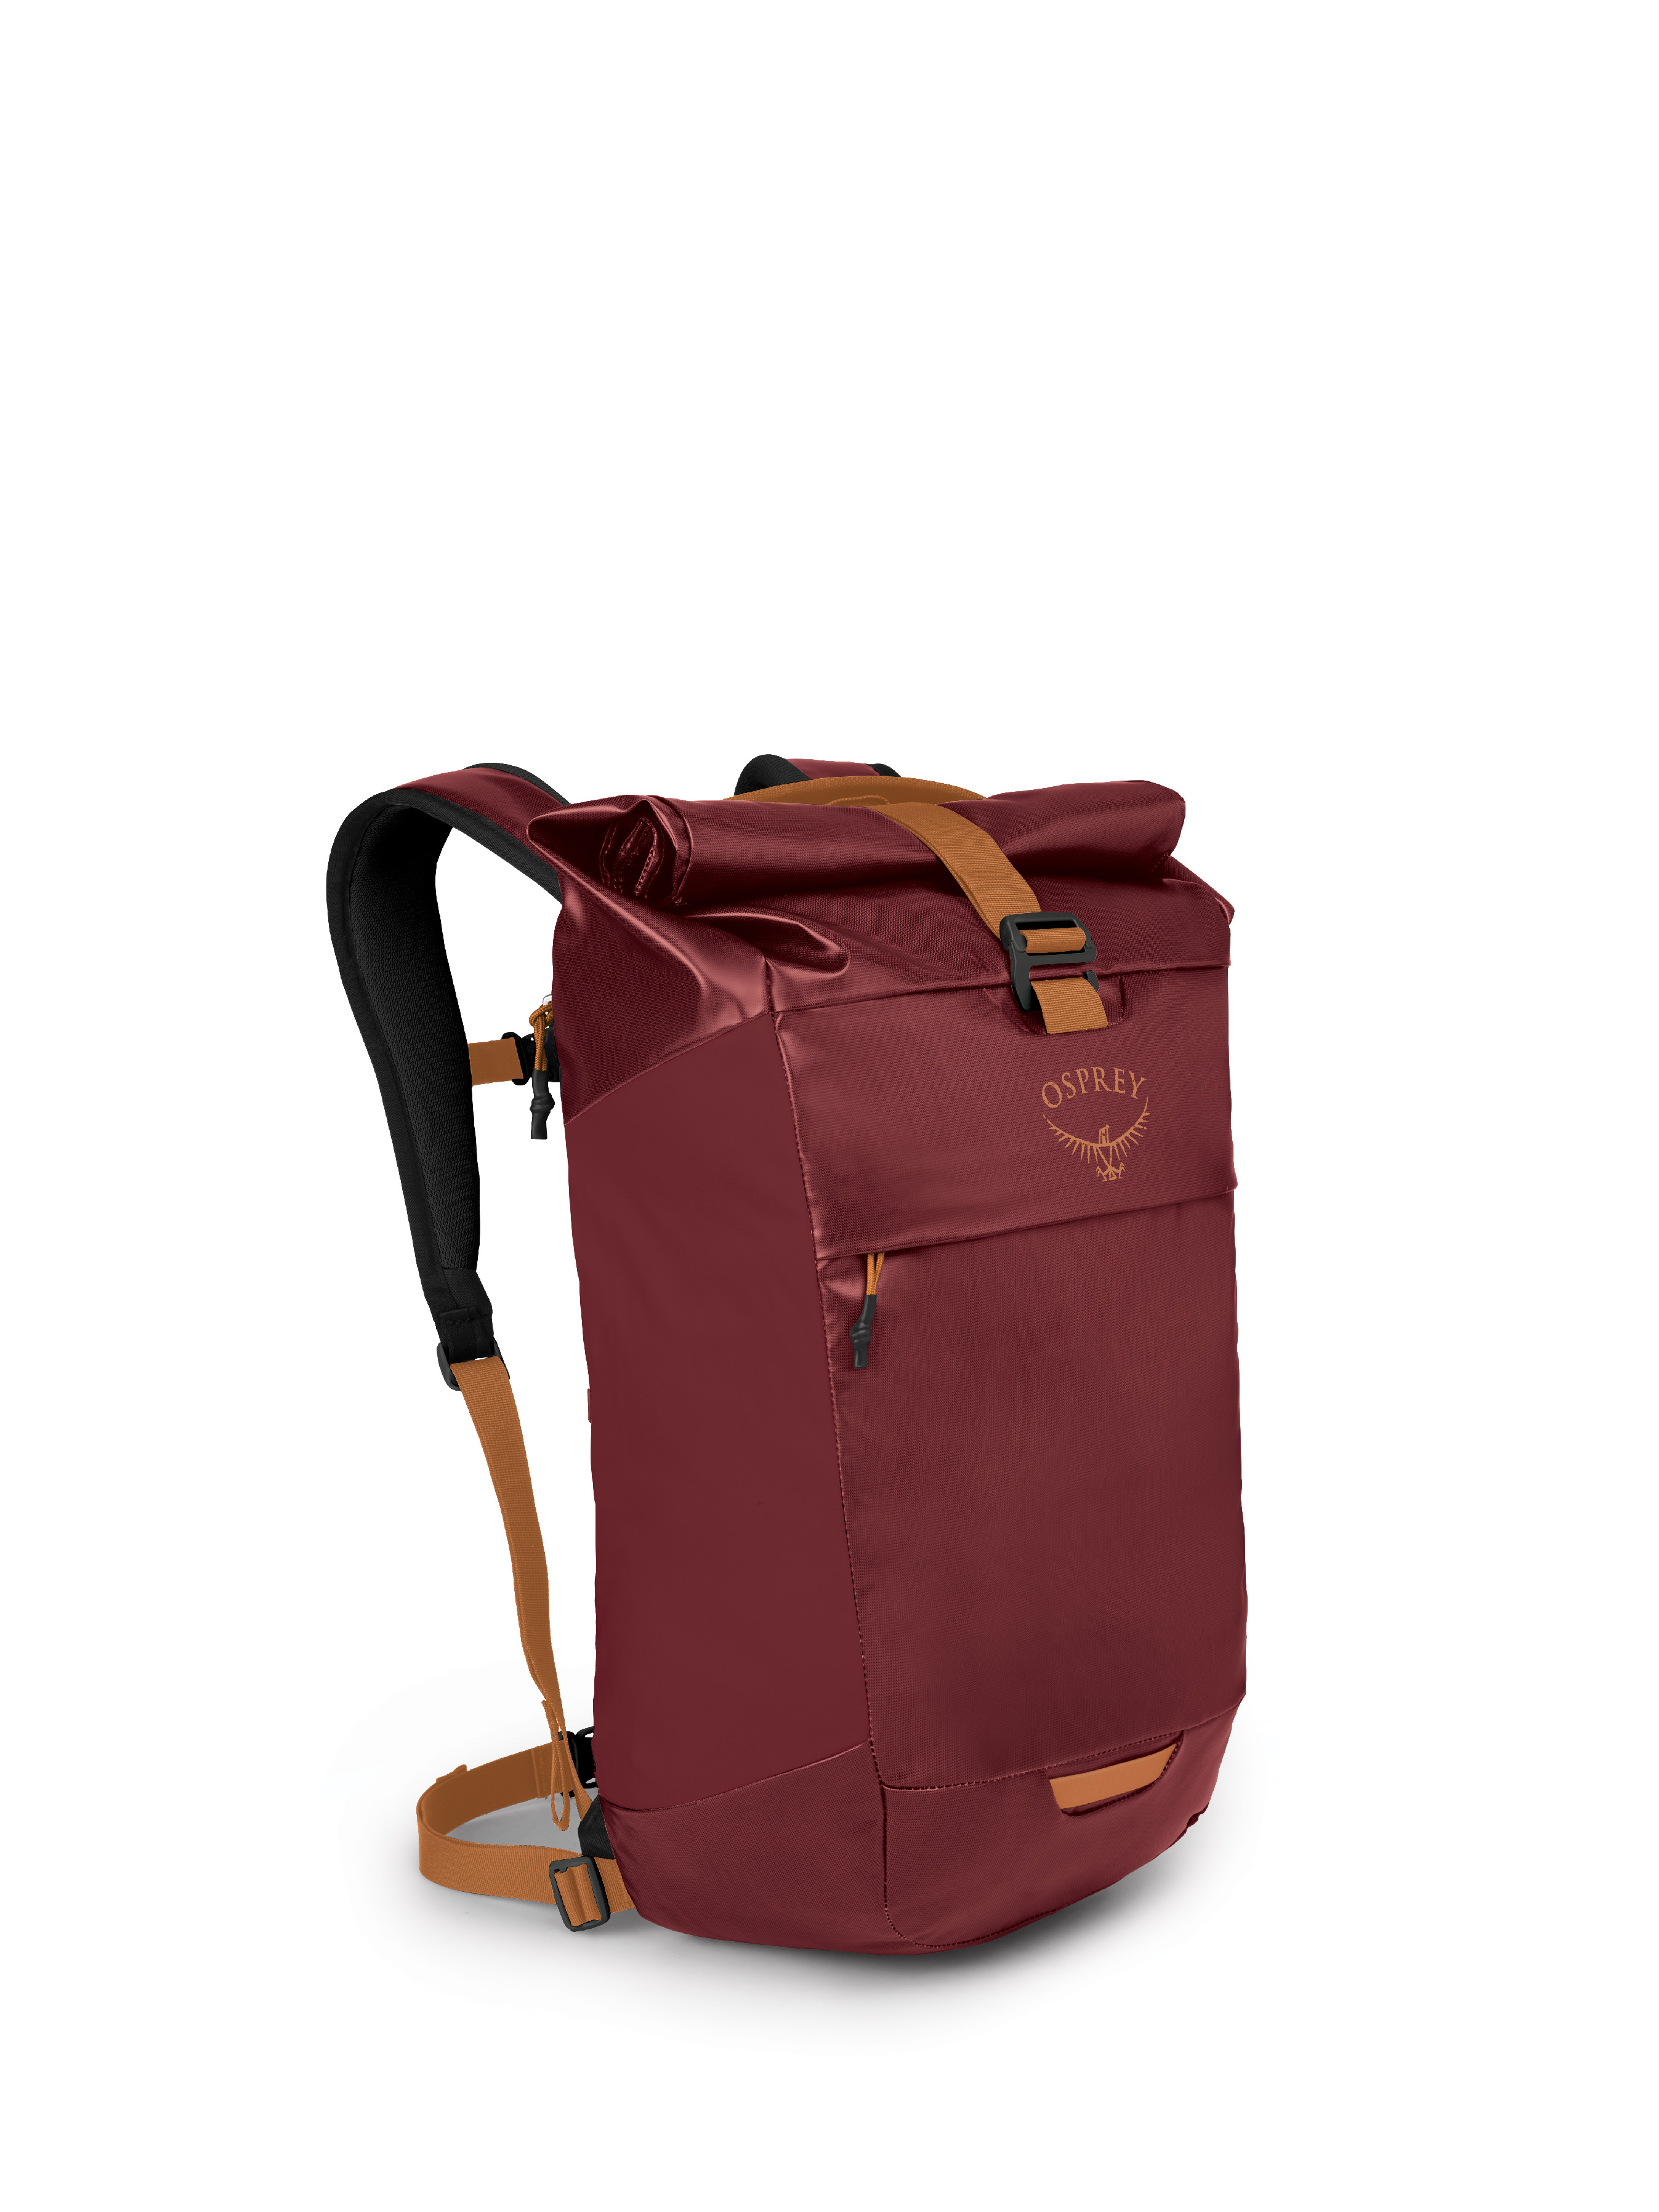 OSPREY TRANSPORTER ROLL TOP Barva: red mountain